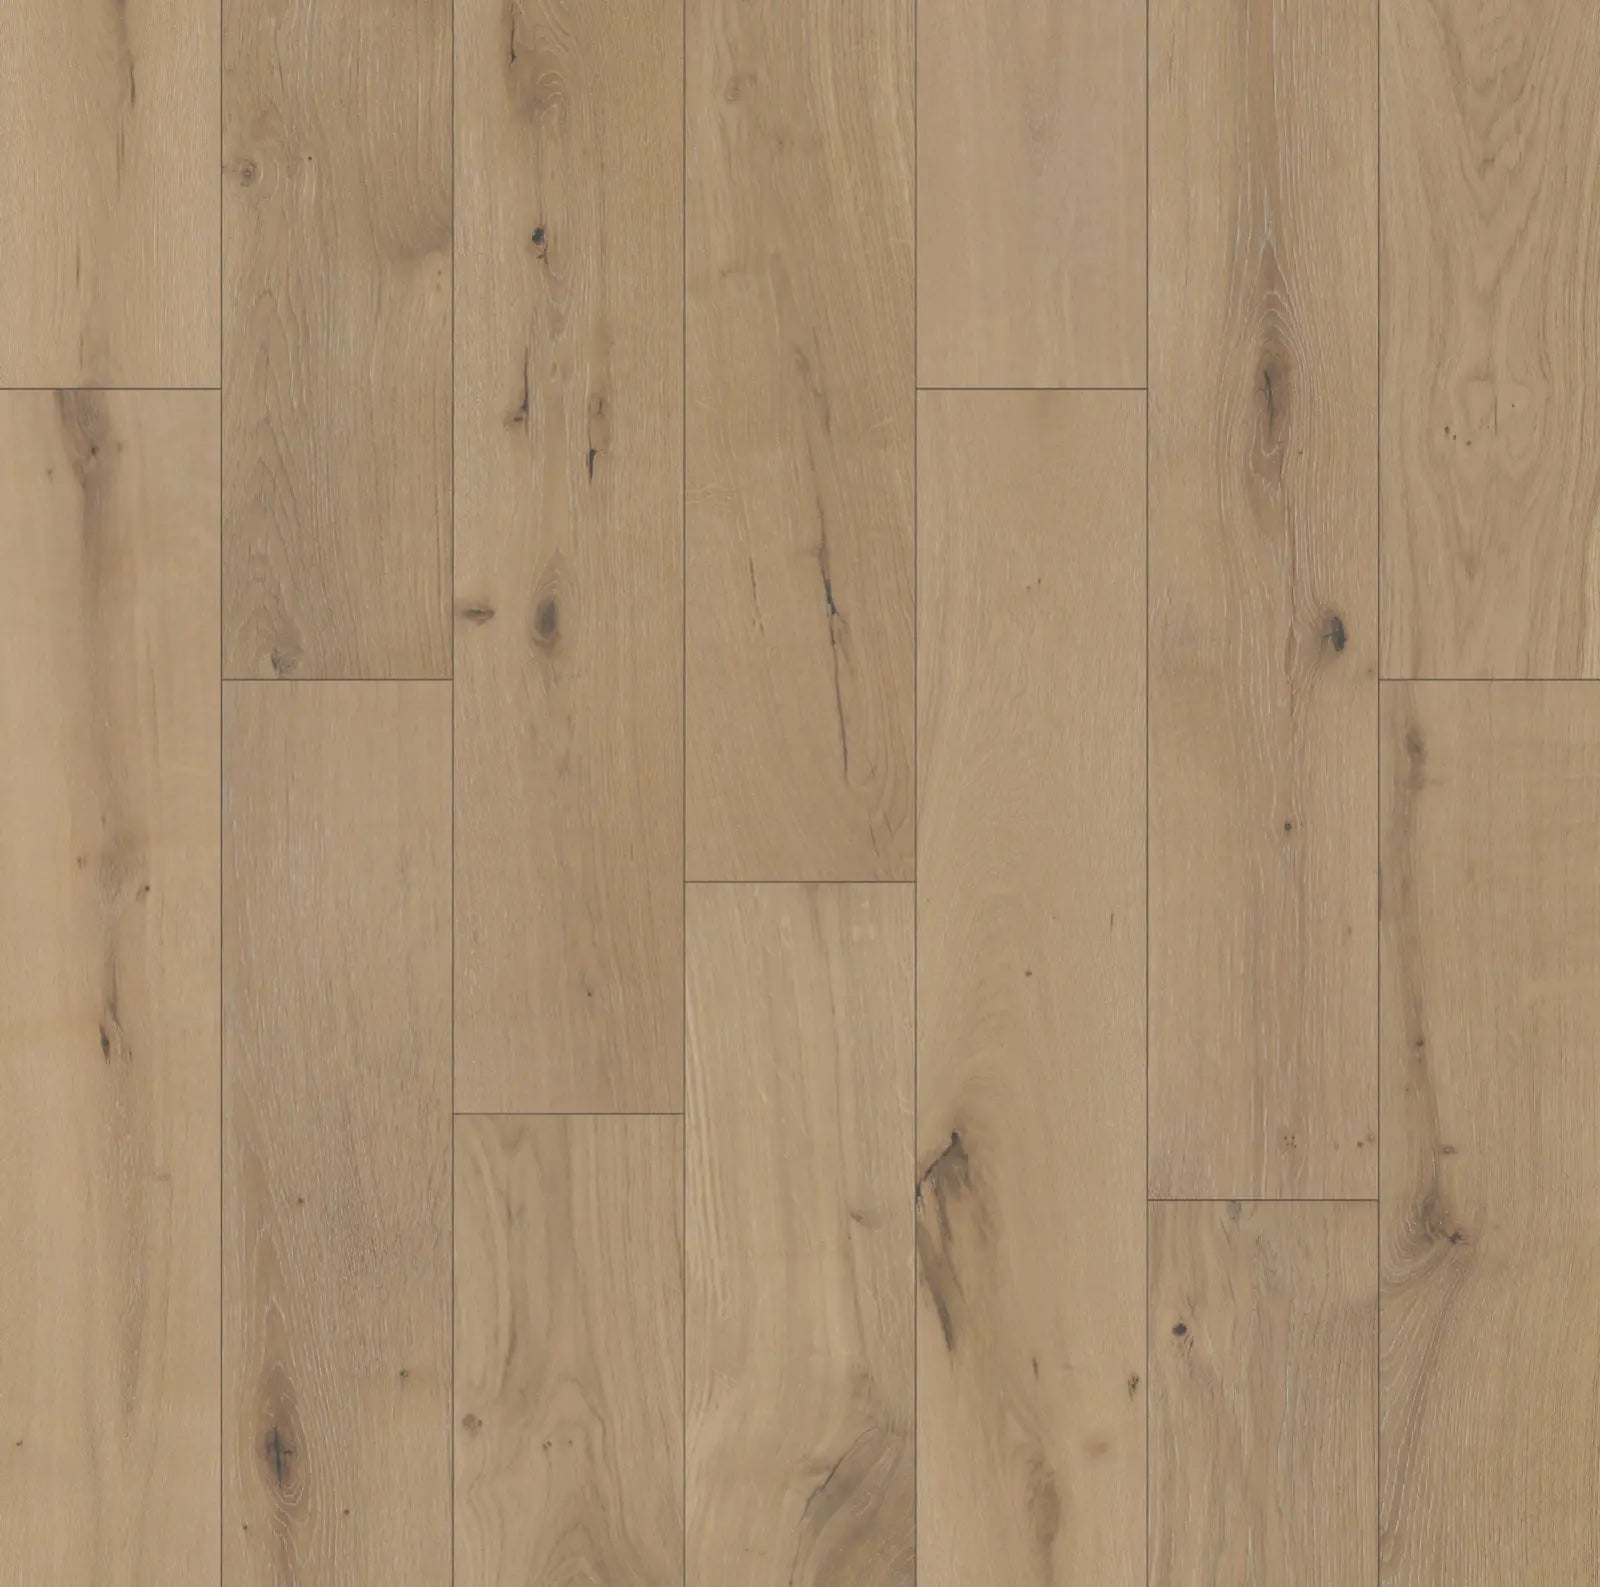 MSW72 Oak Grace Meadows 3/8 x 6-1/2" Wire Brushed Engineered- Call 844-356-6711 for BEST price! MW floors